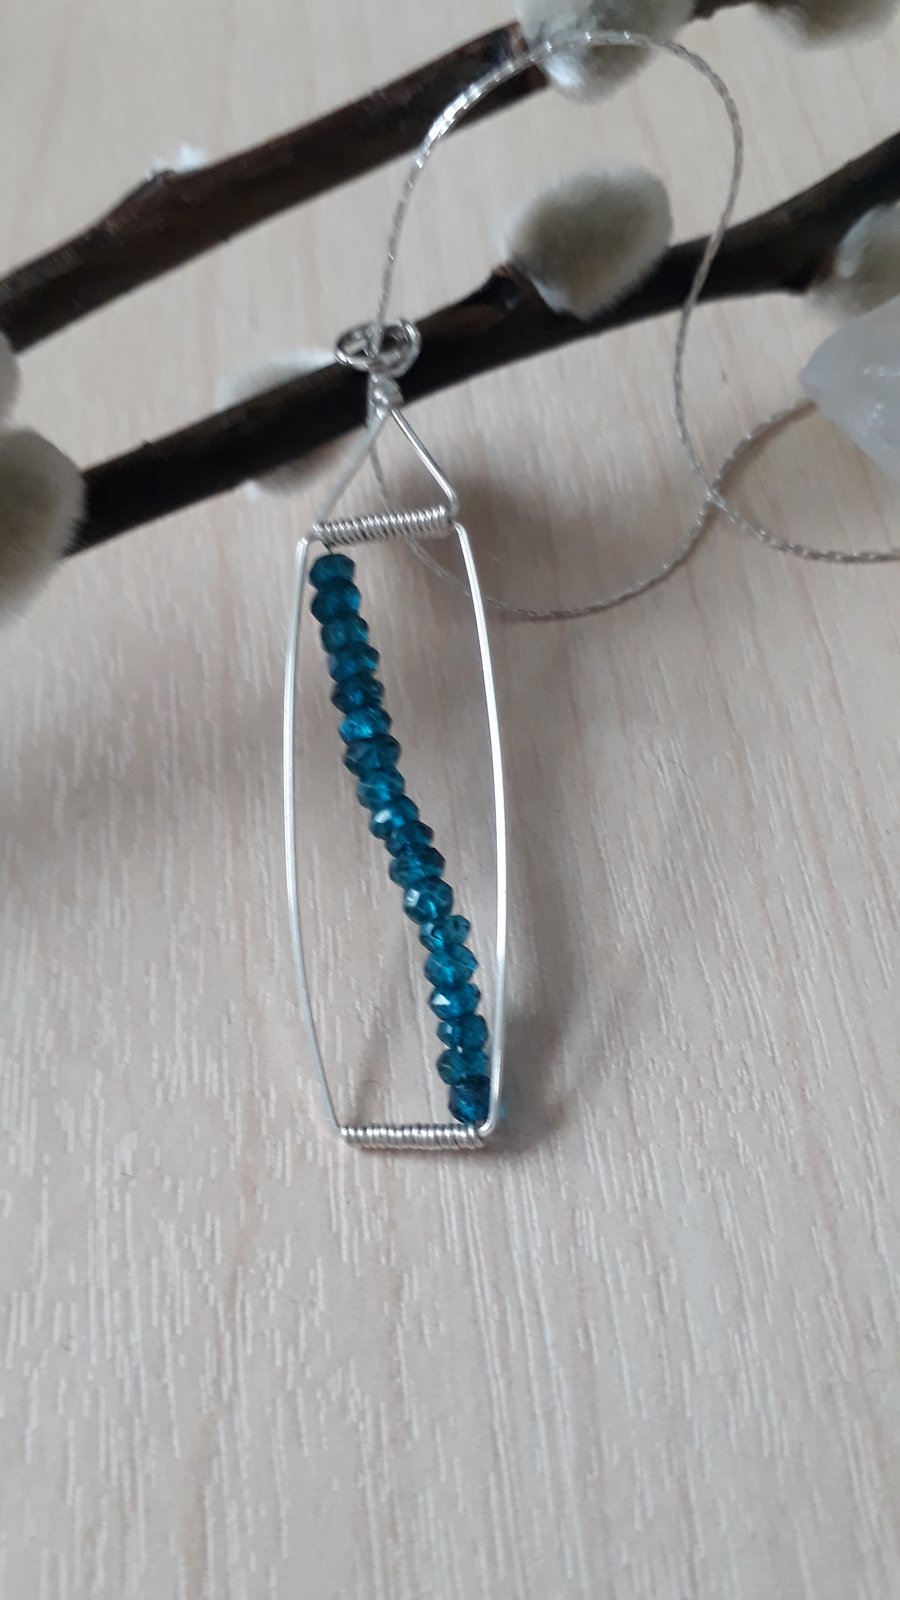 Geometric Sterling Silver Pendant with Apatite Beads on a Silver Necklace